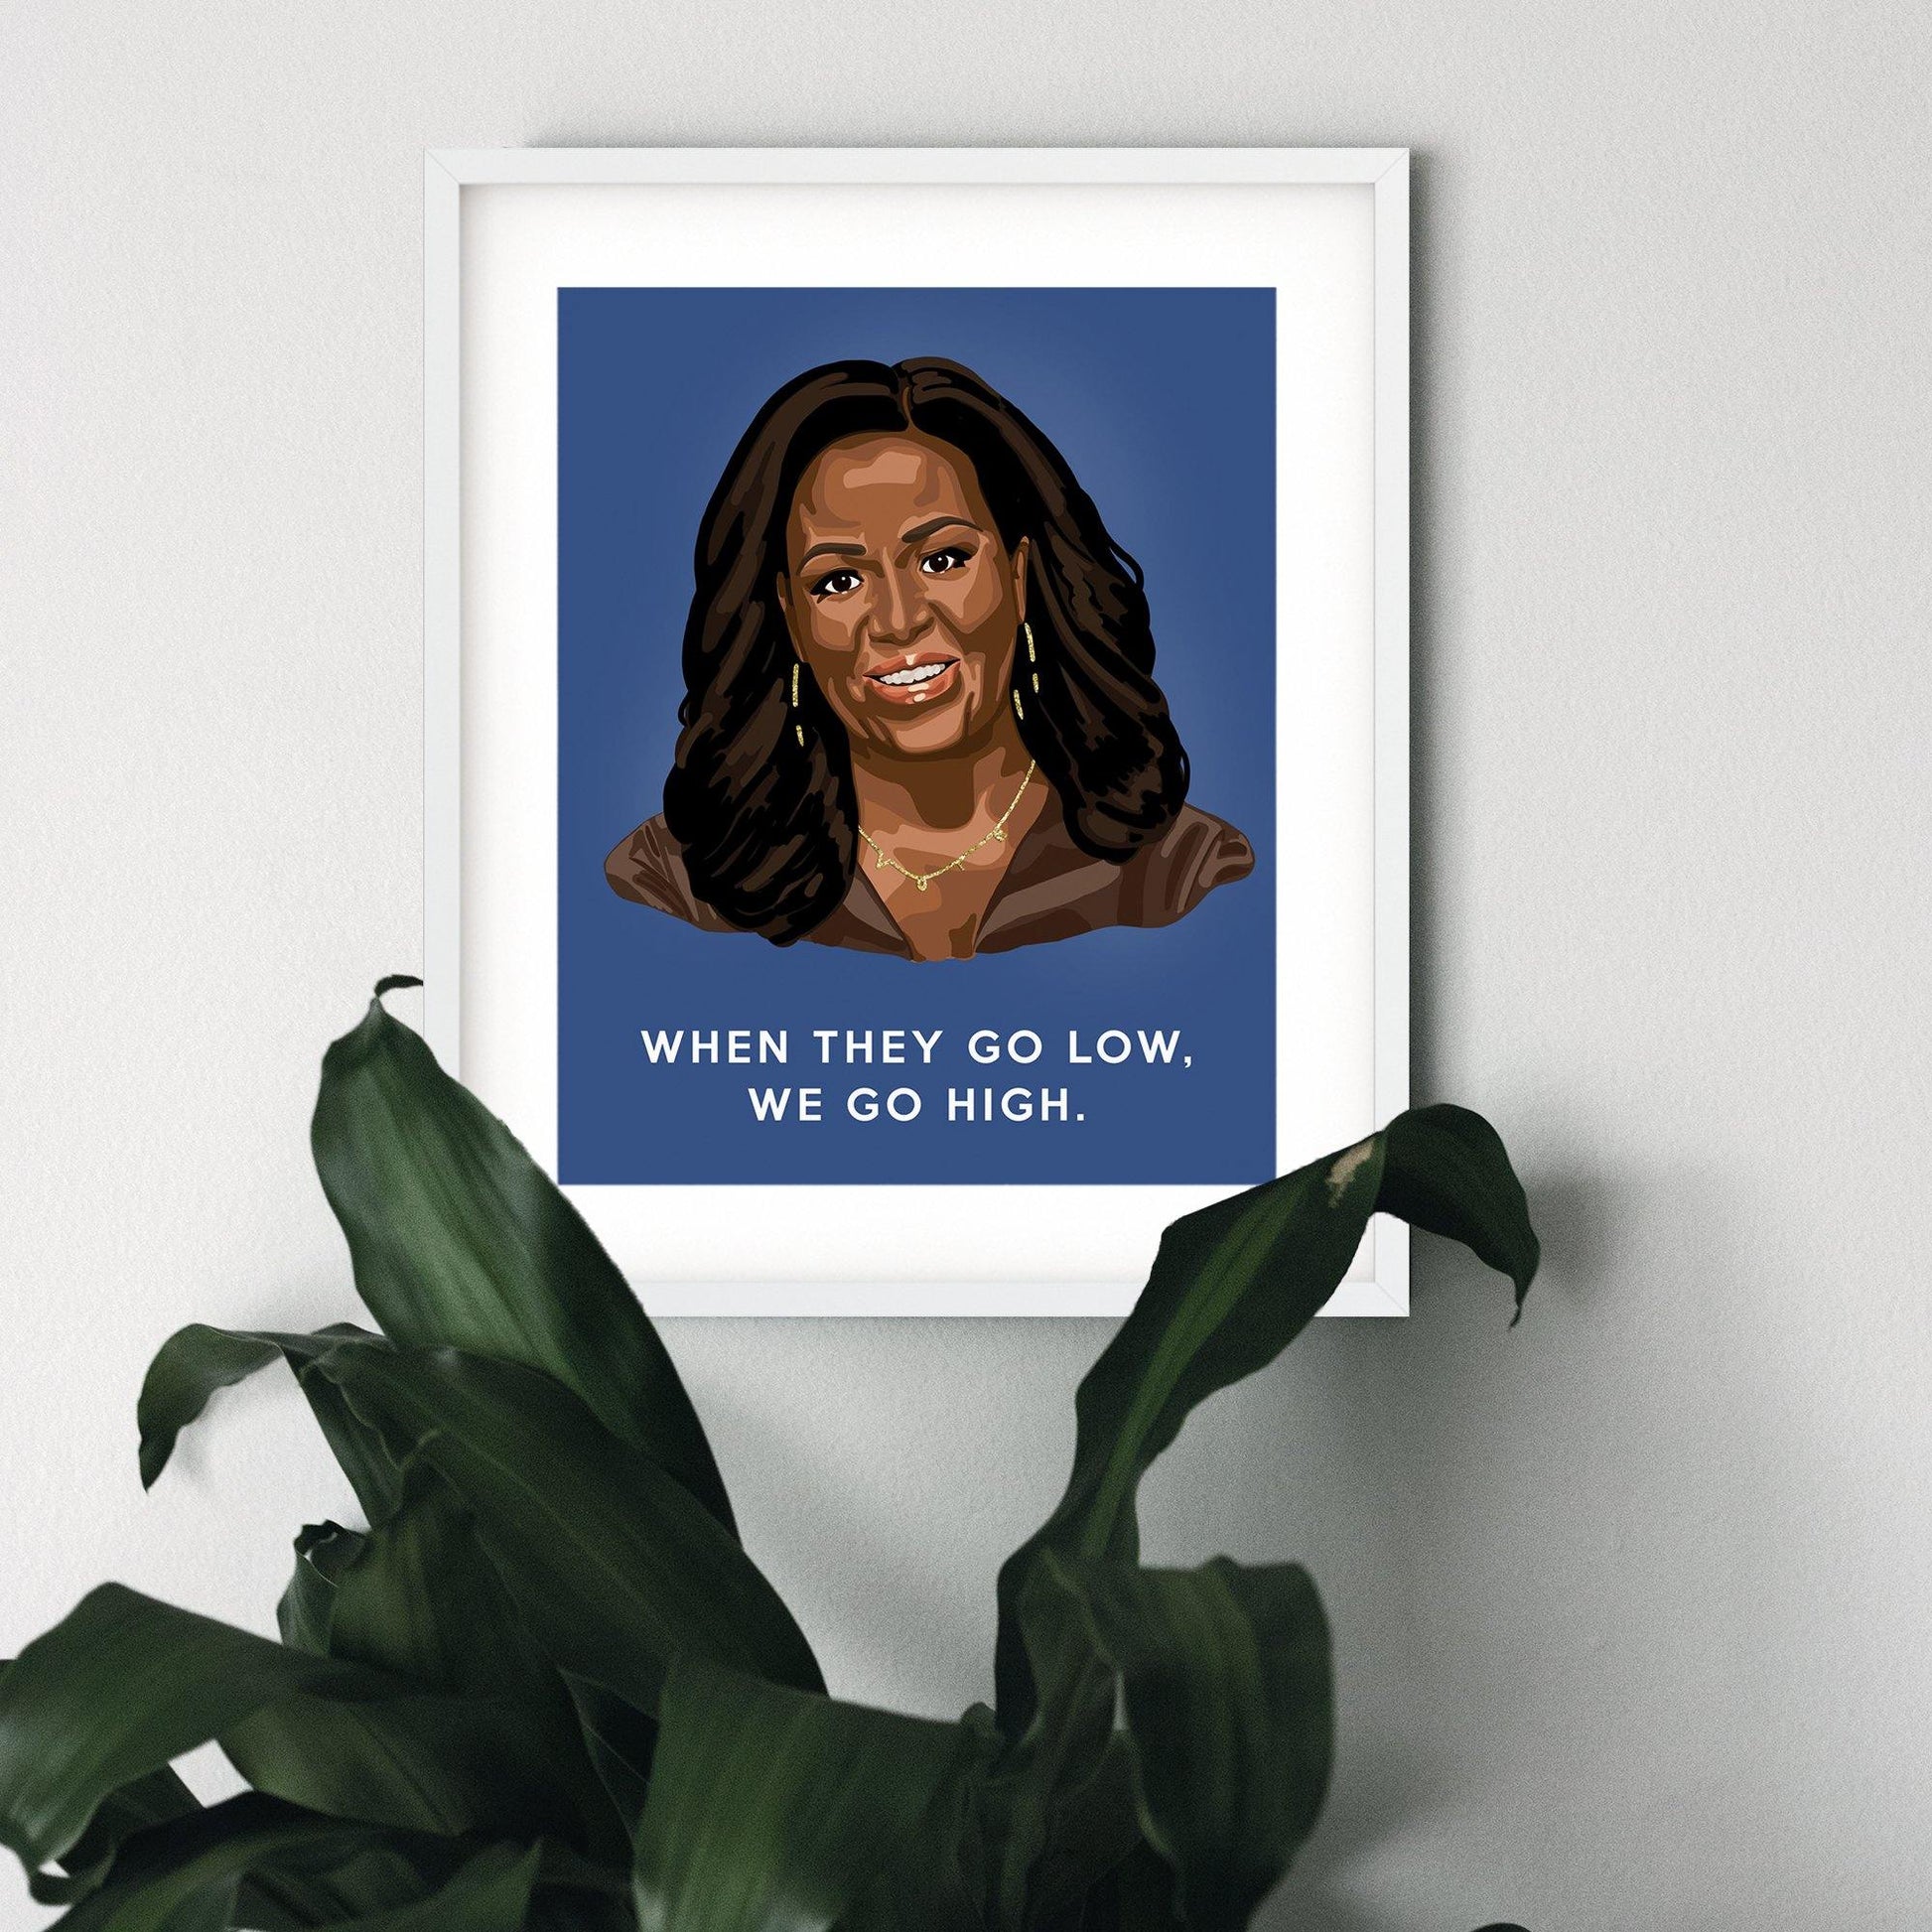 Michelle Obama portrait feat. 'When They Go Low' quote, white frame with mat - Candid Almond